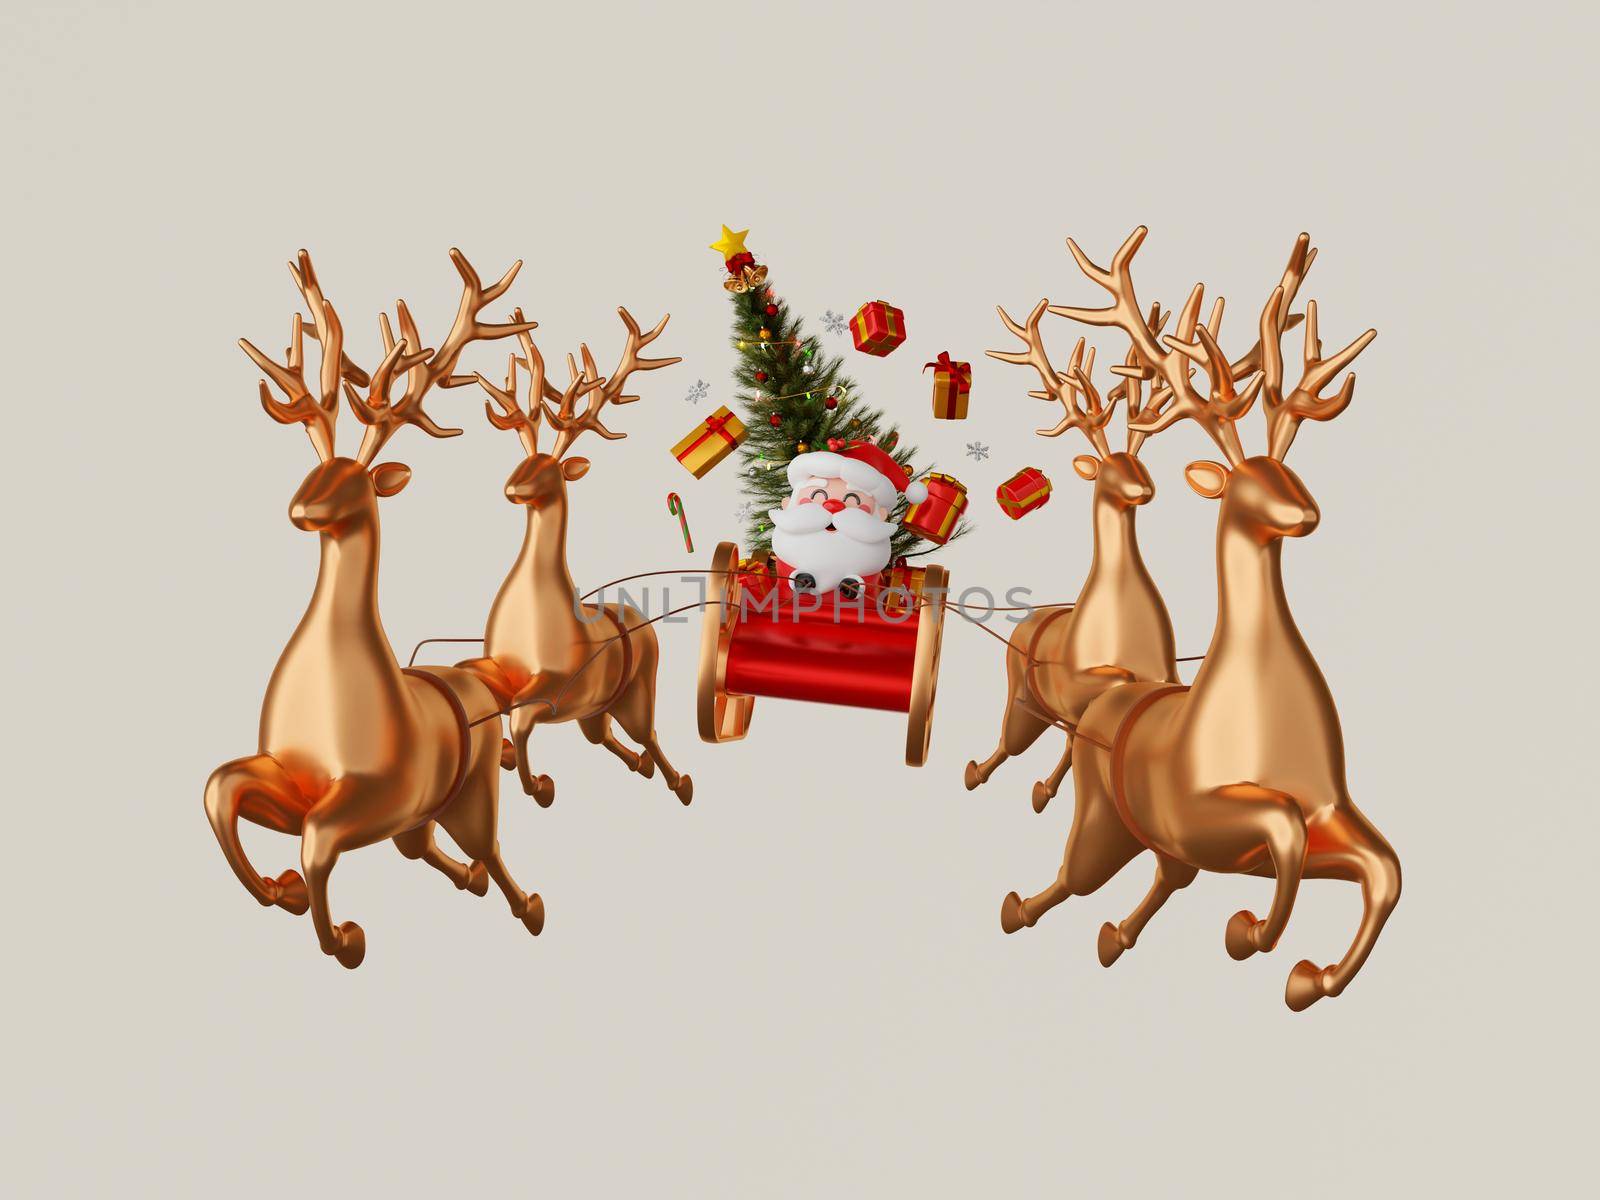 3d illustration of Santa Claus riding on sleigh with gift box by nutzchotwarut